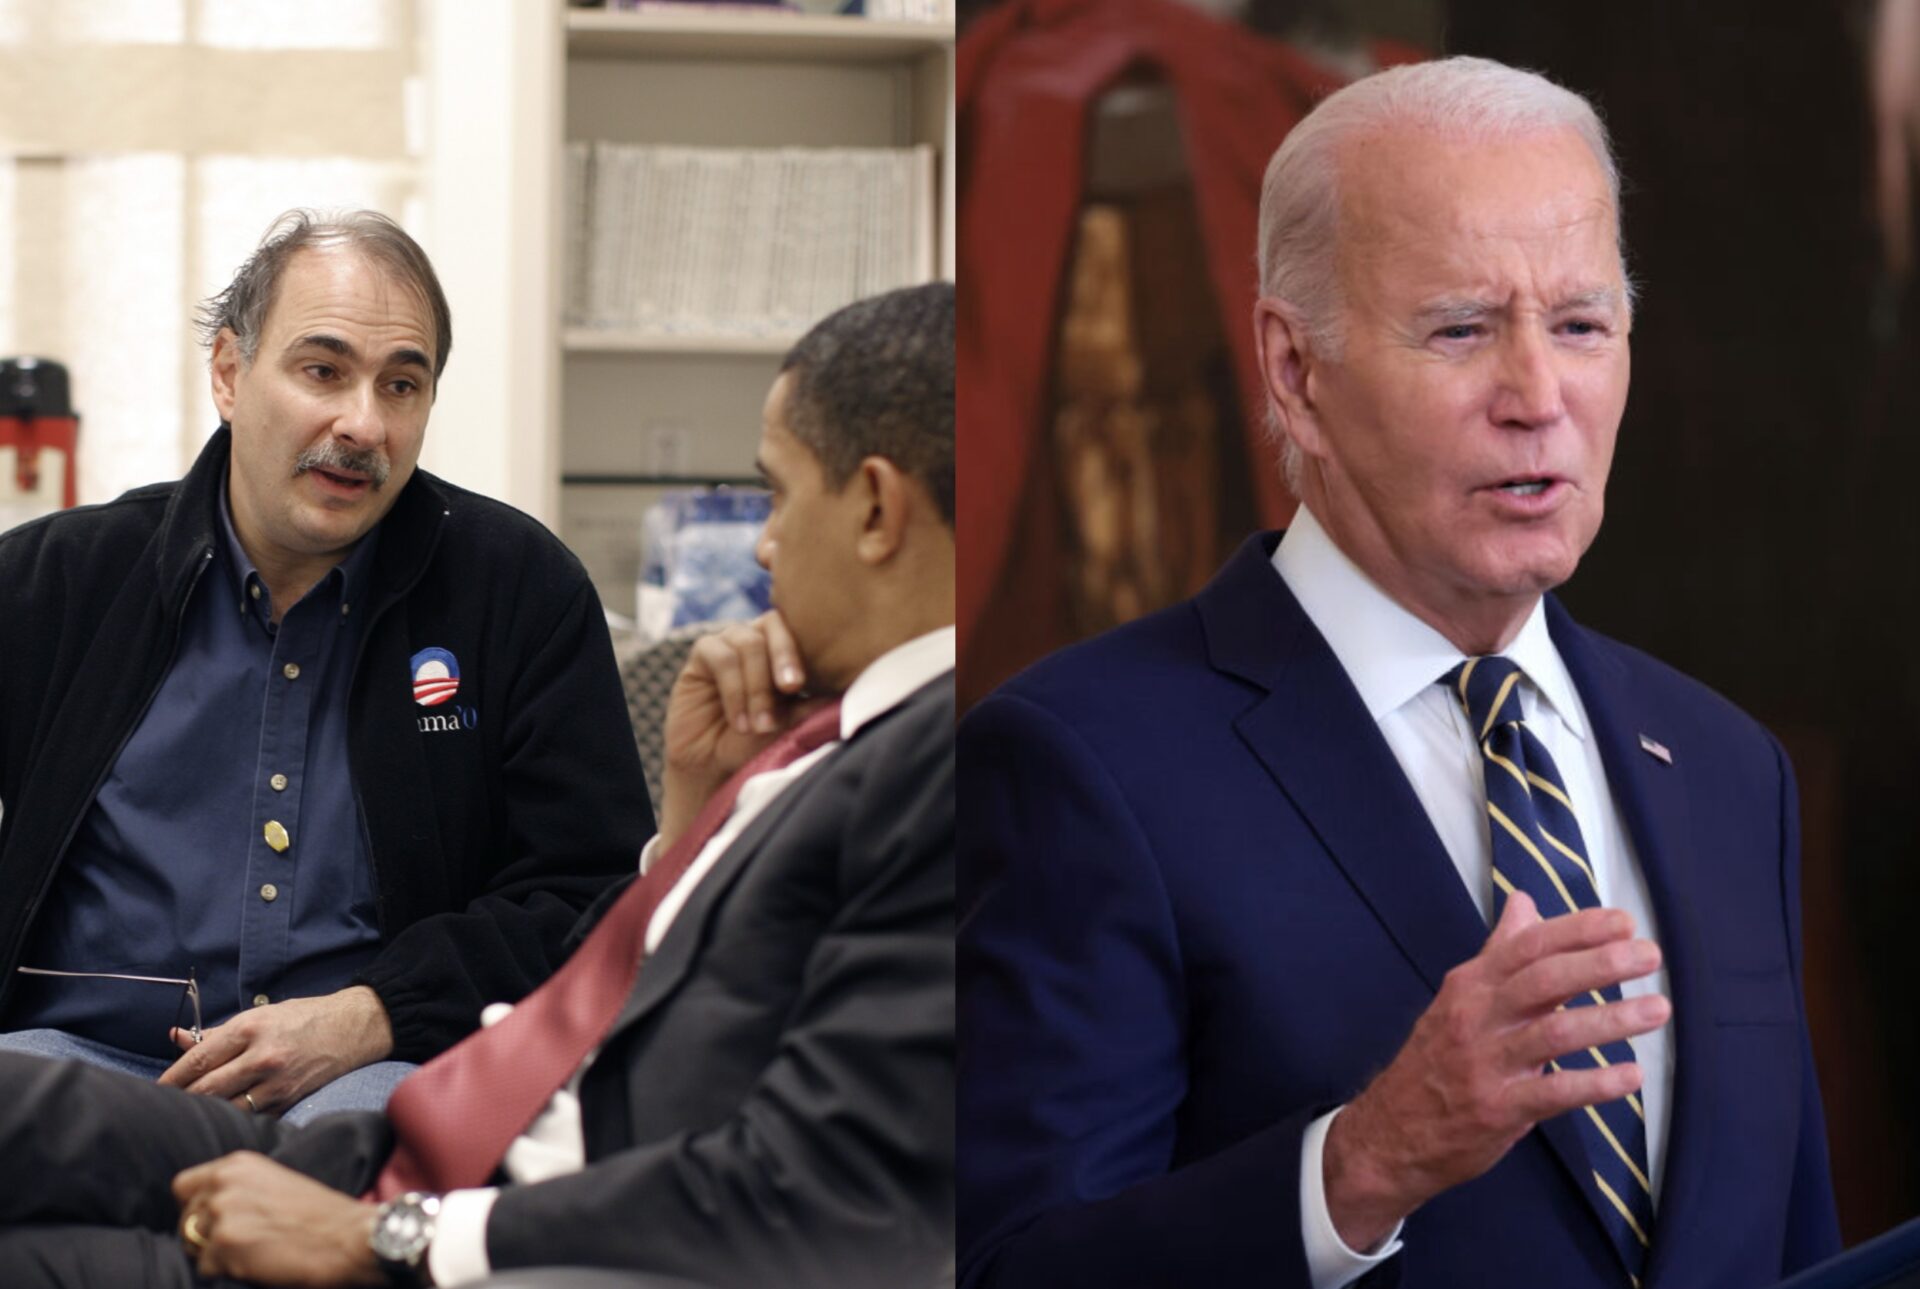 To Drop Out or Not? Former Obama Adviser Gives Mixed Signals On Whether Biden Should Continue His Campaign